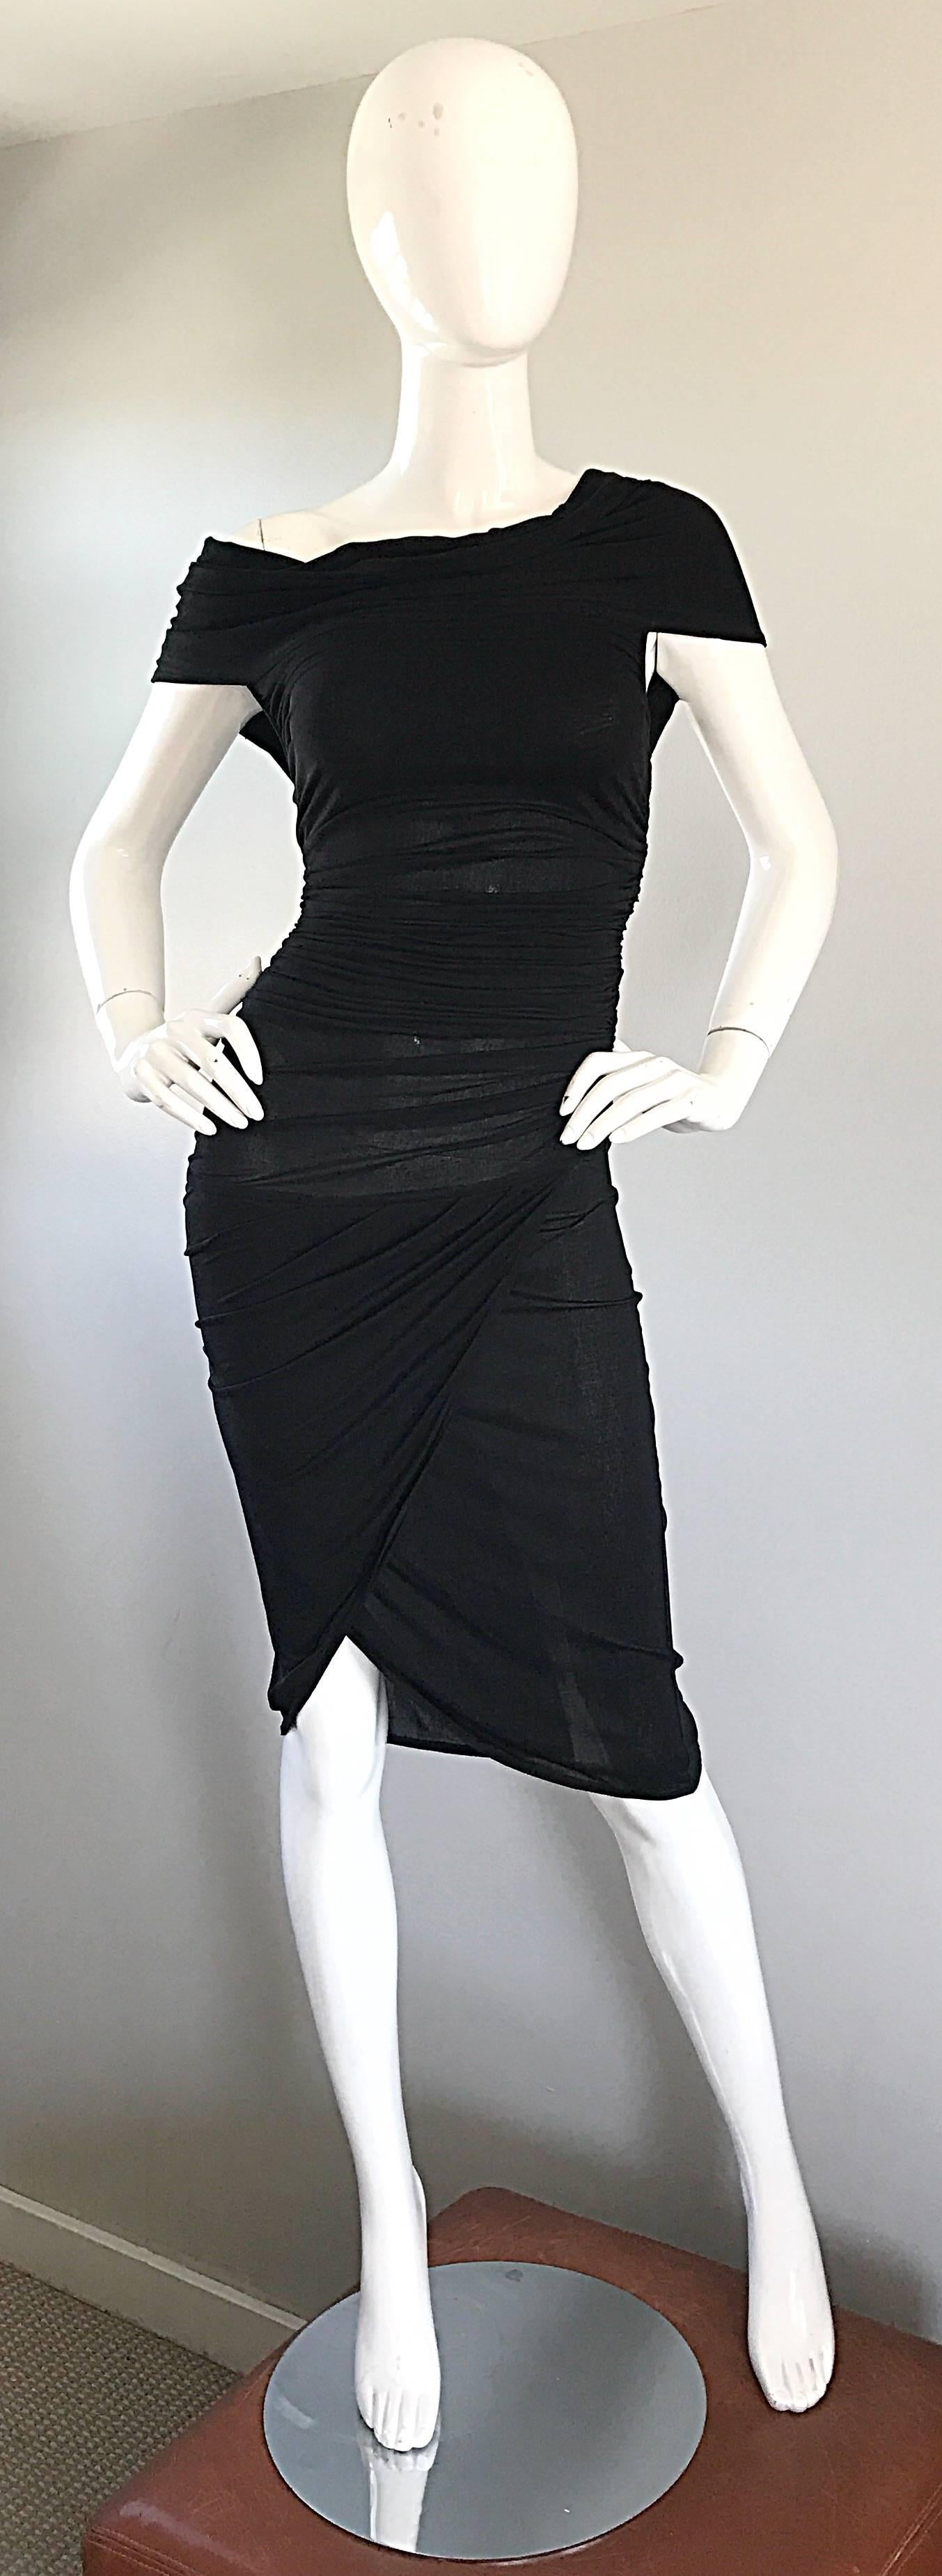 Sexy CELINE 90s black vintage bodcon dress! This is the perfect little black dress! Features flattering ruching detail thorughout. Semi sheer in all the right places, that do not require additional undergarments. Sits off one of the shoulders.